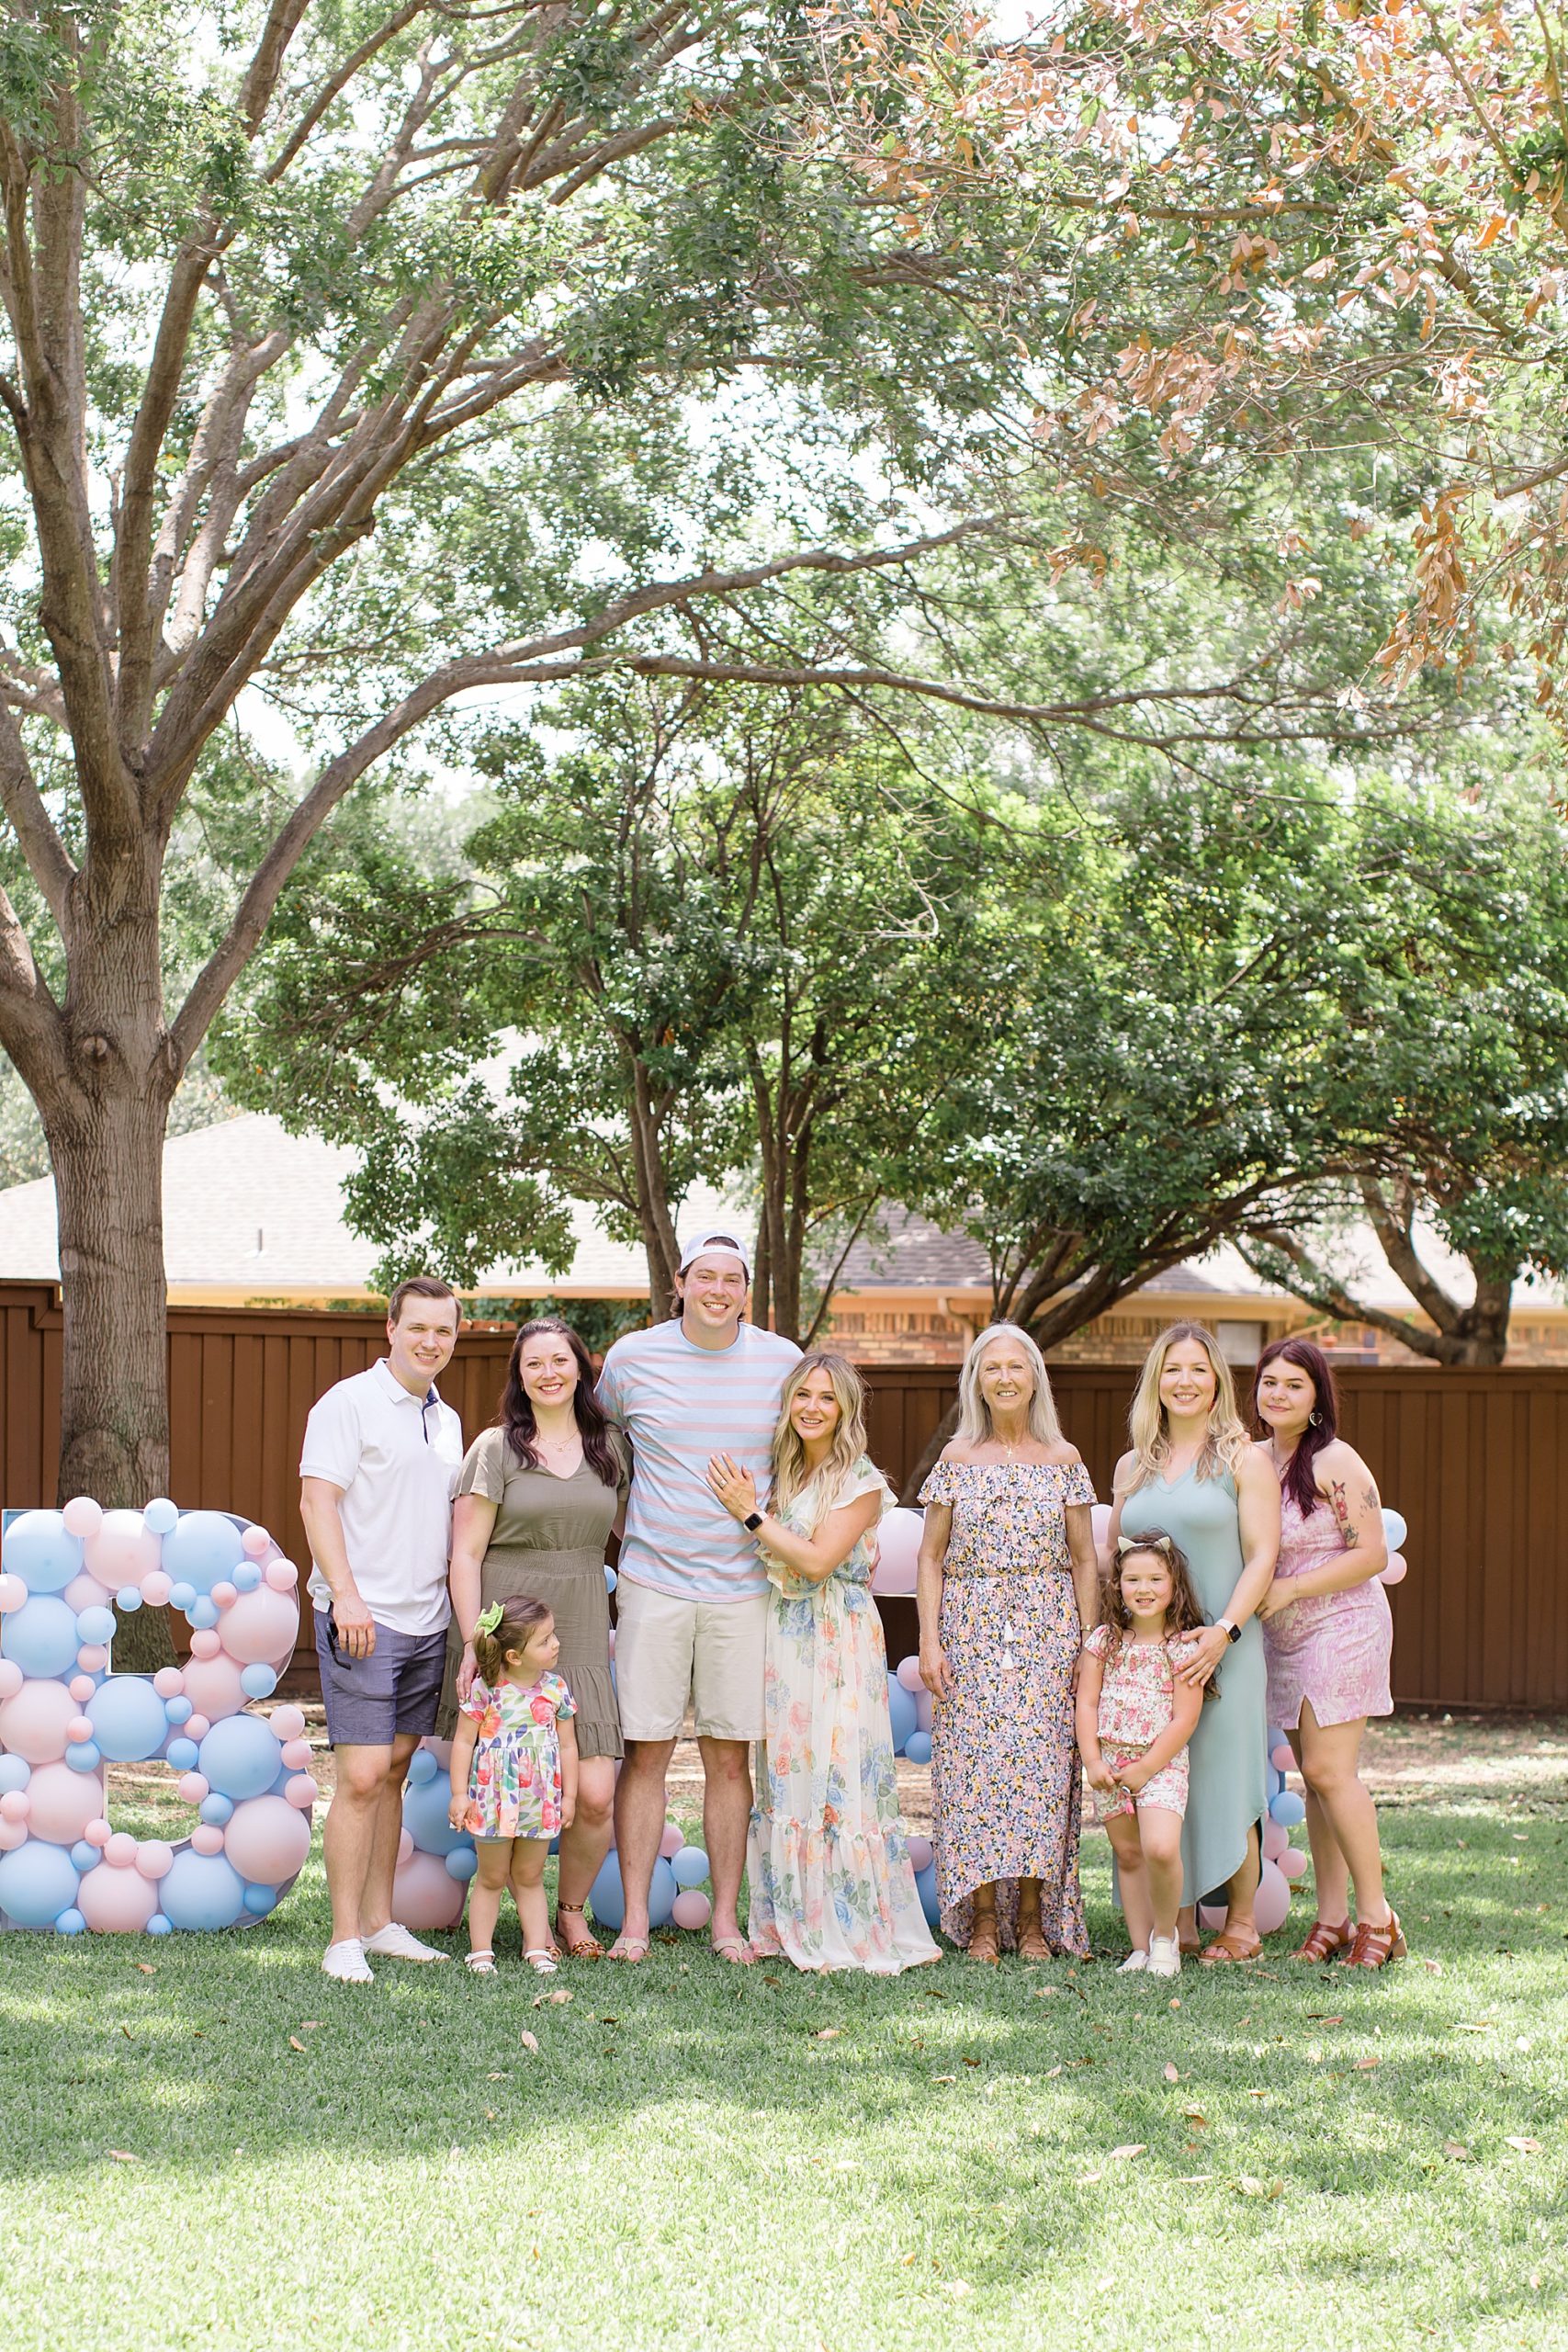 expecting parents pose with family by BABY sign in backyard